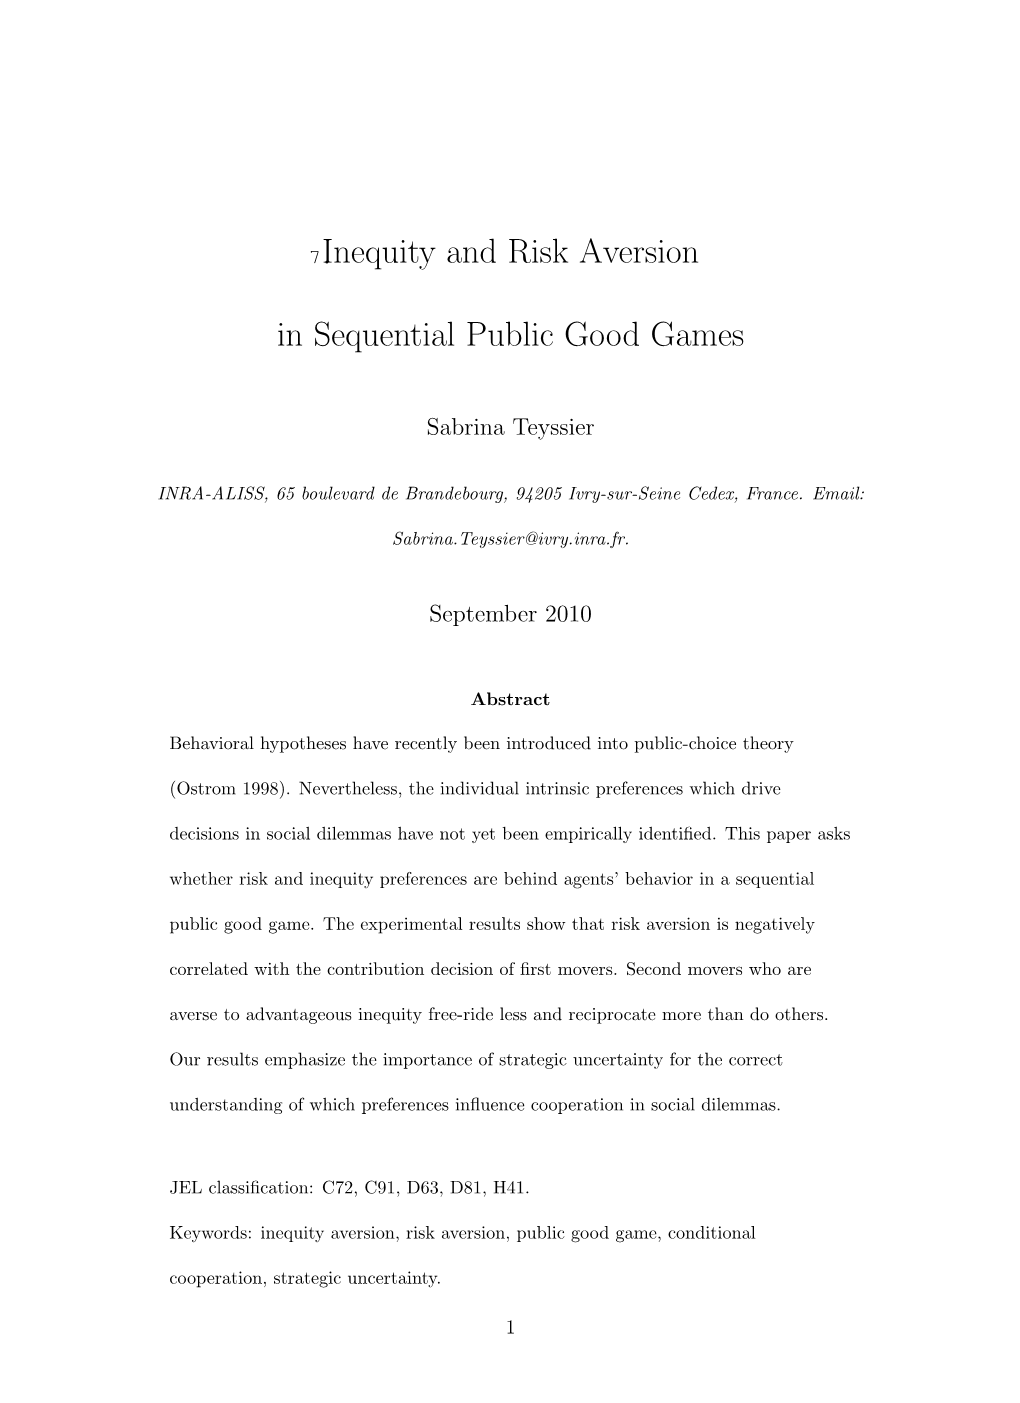 Inequity and Risk Aversion in Sequential Public Good